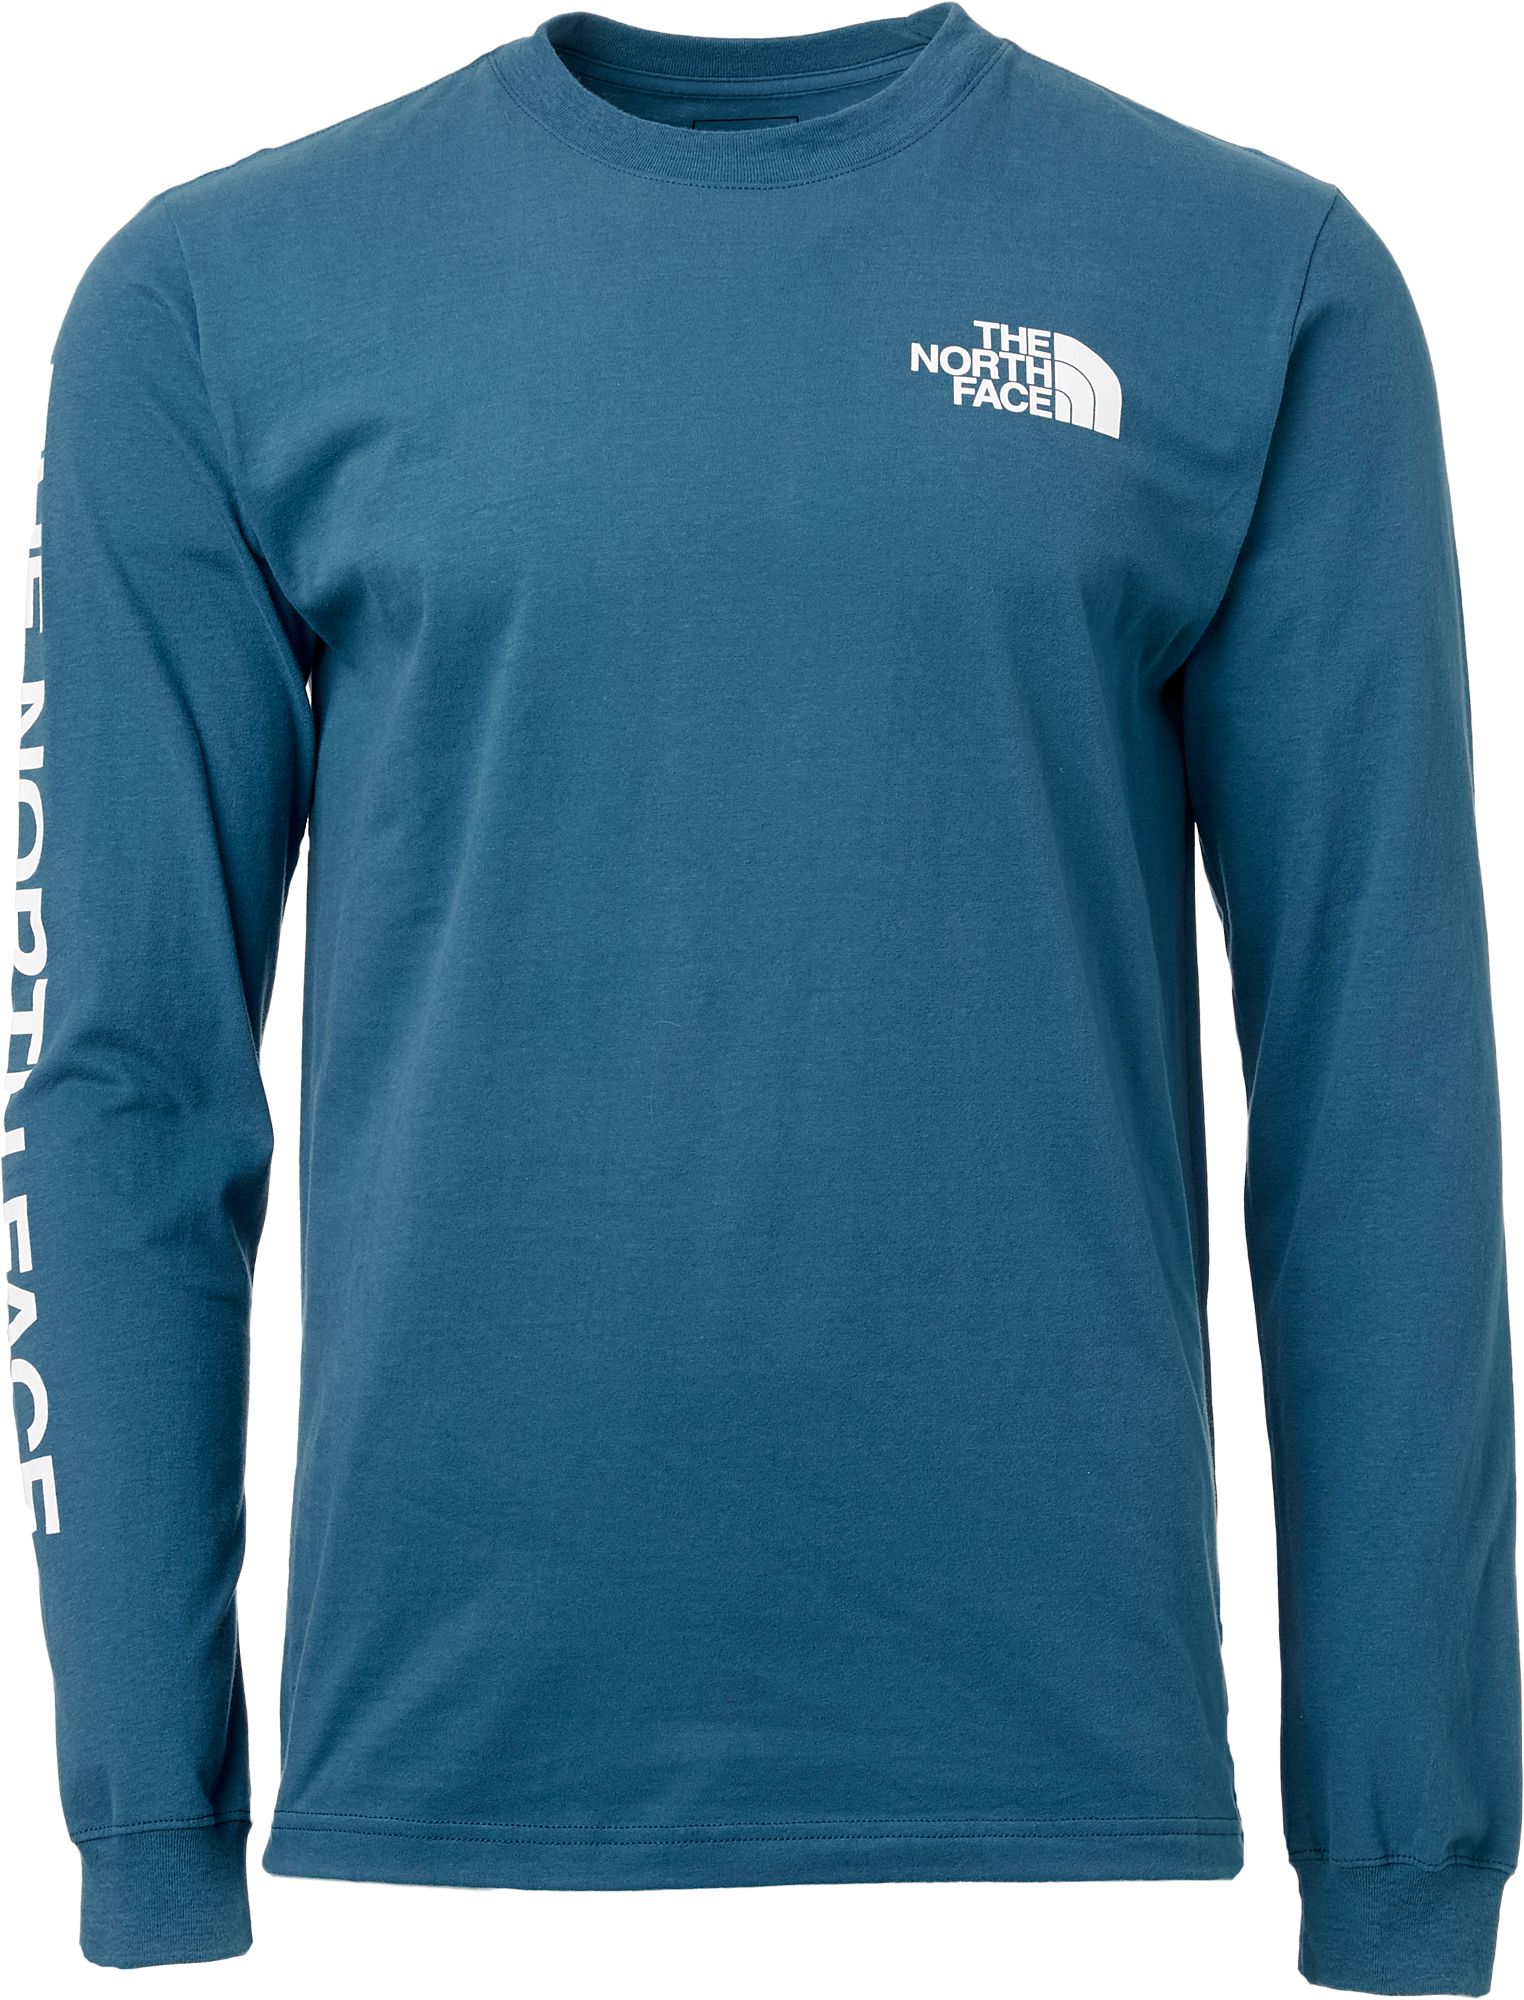 north face sleeve